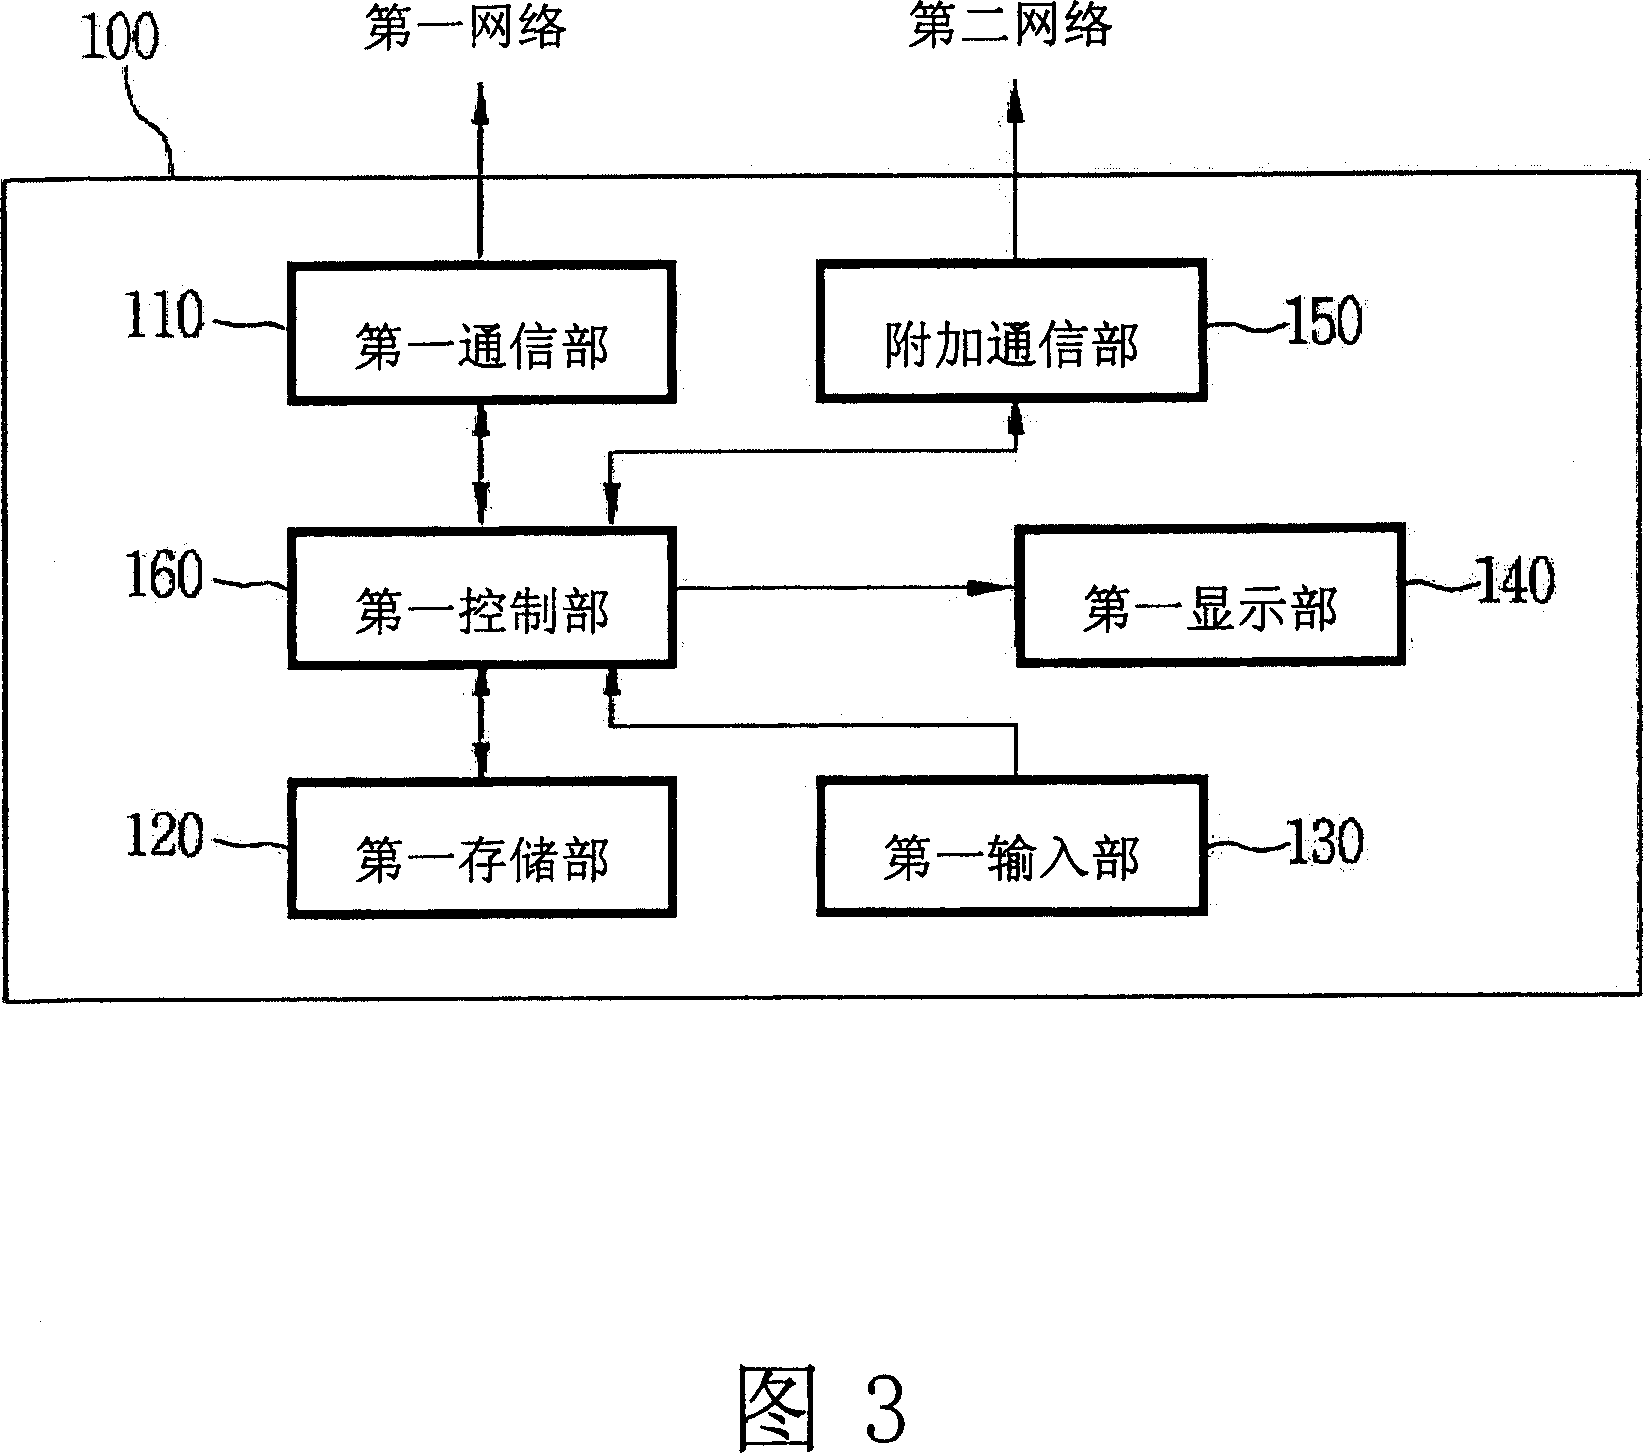 Self-diagnosing information processing system of rice cooker